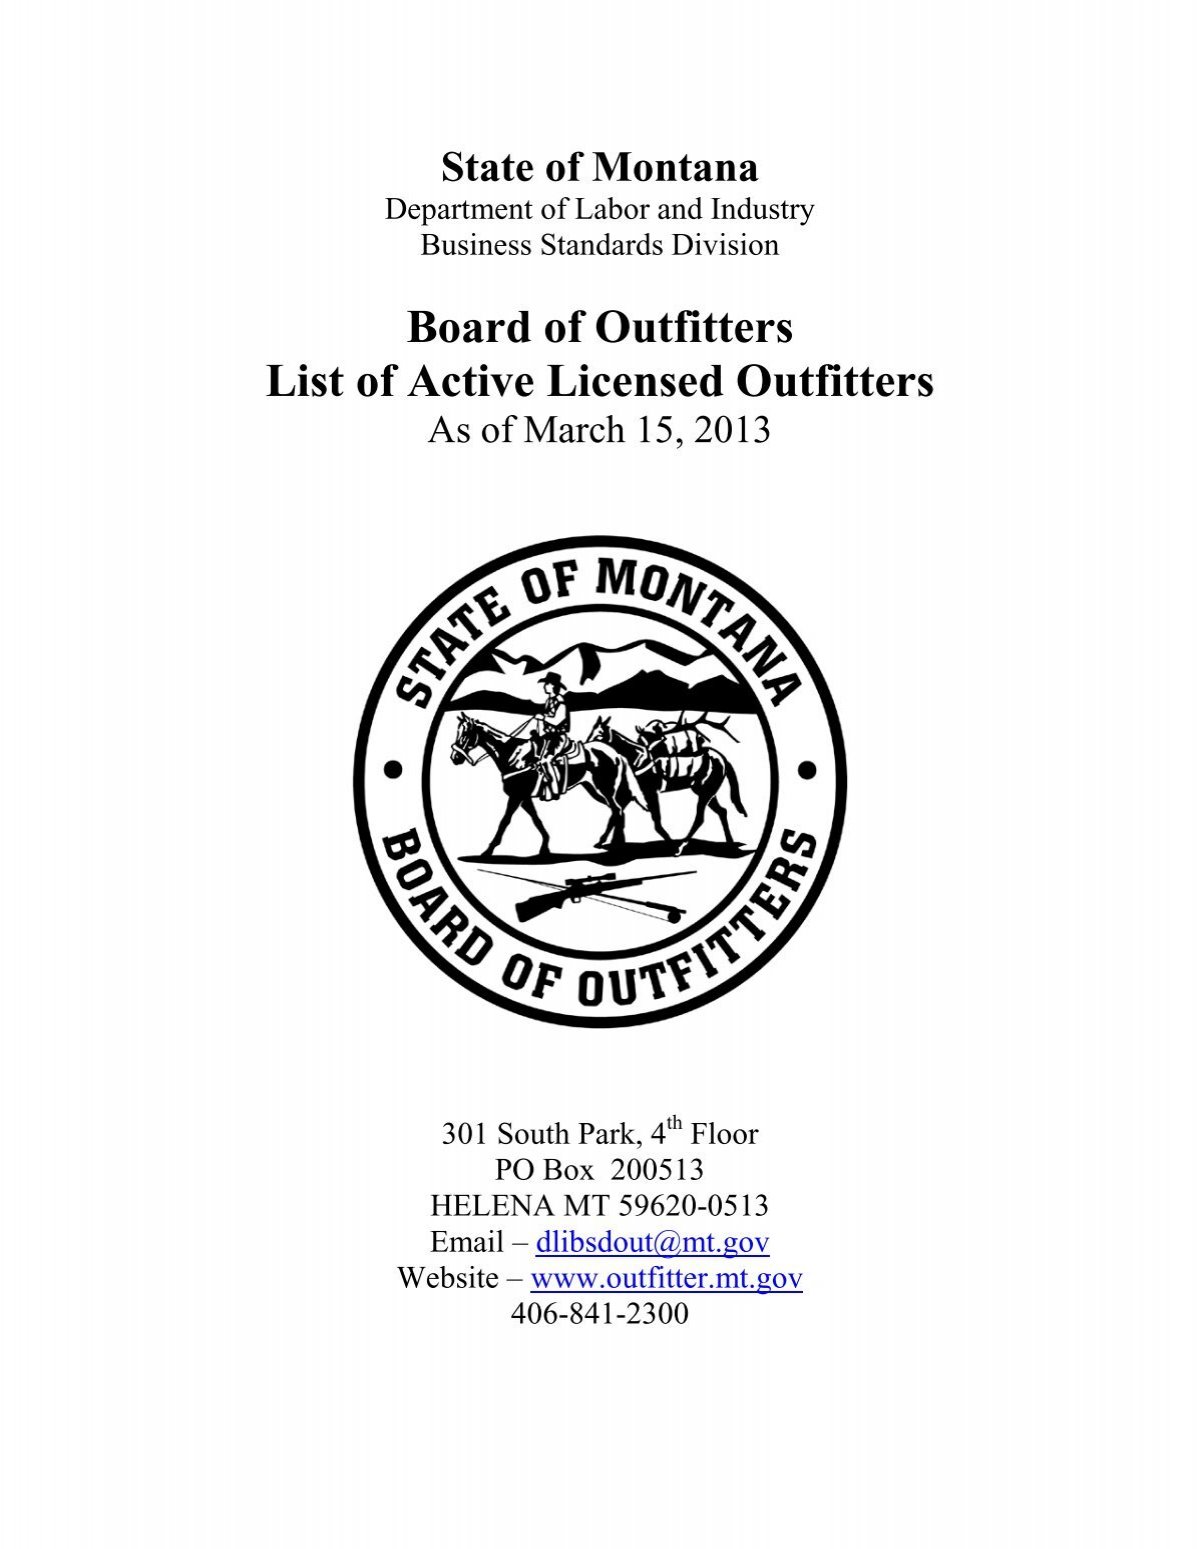 Board of Outfitters List of Active Licensed Outfitters - Montana DLI